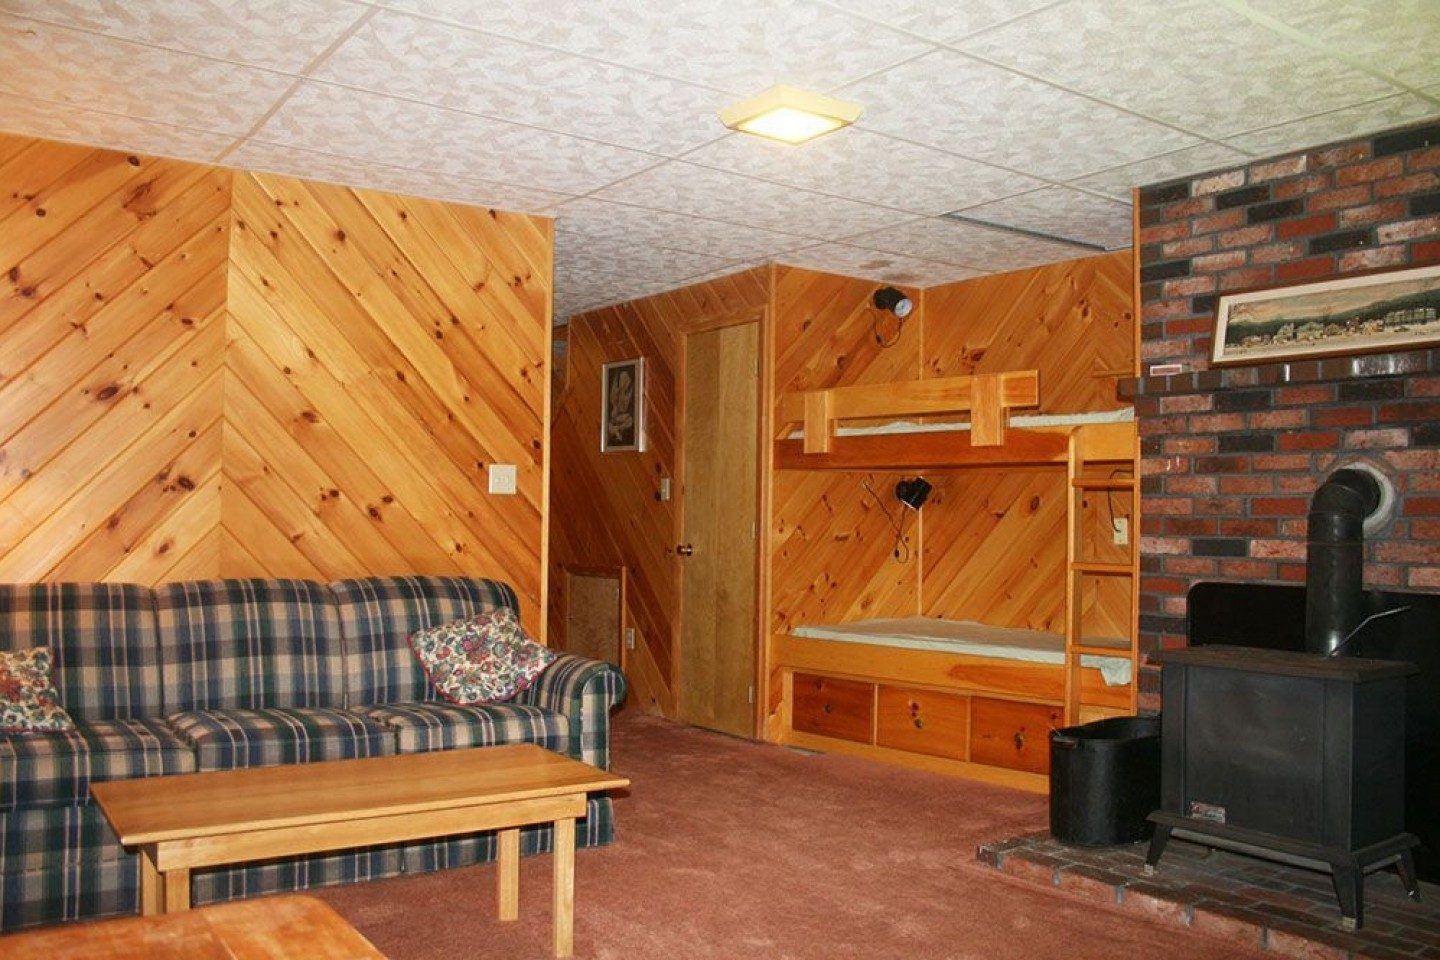 South Ridge H - Lower level with bunks and wood stove